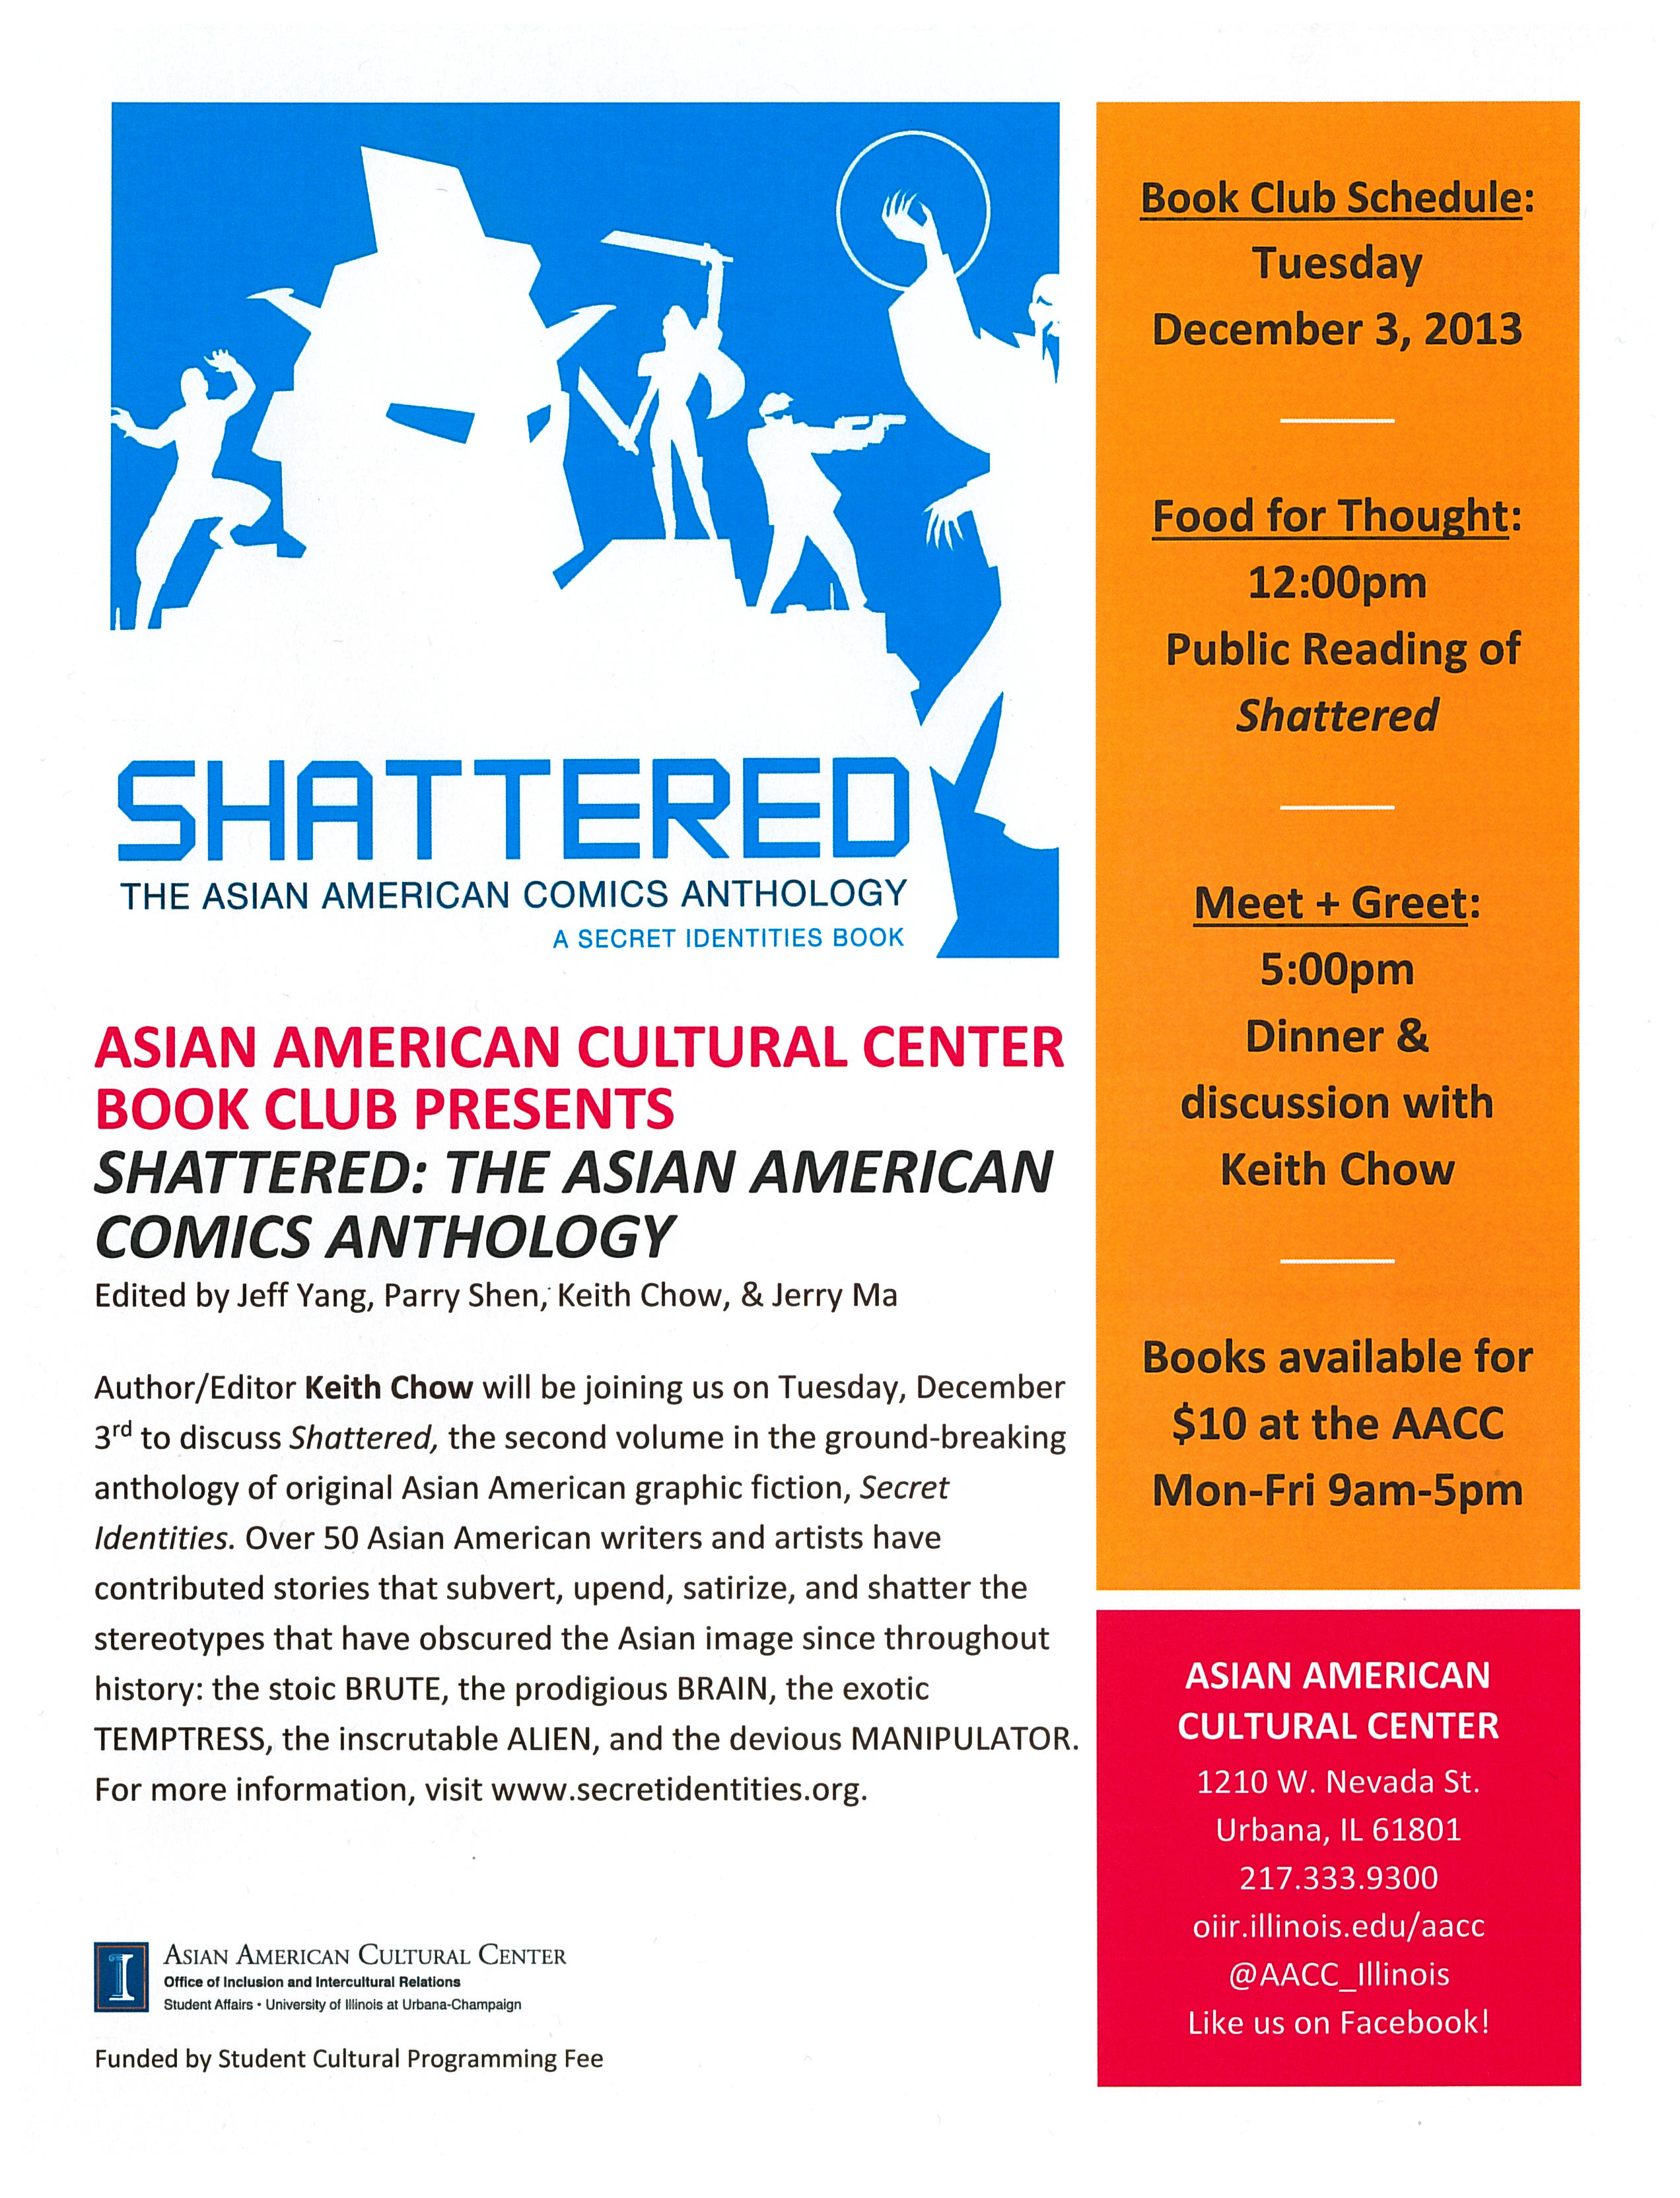 'Shattered' poster featuring text about the book and events as well as comic book figure shapes silhouetted against blue background